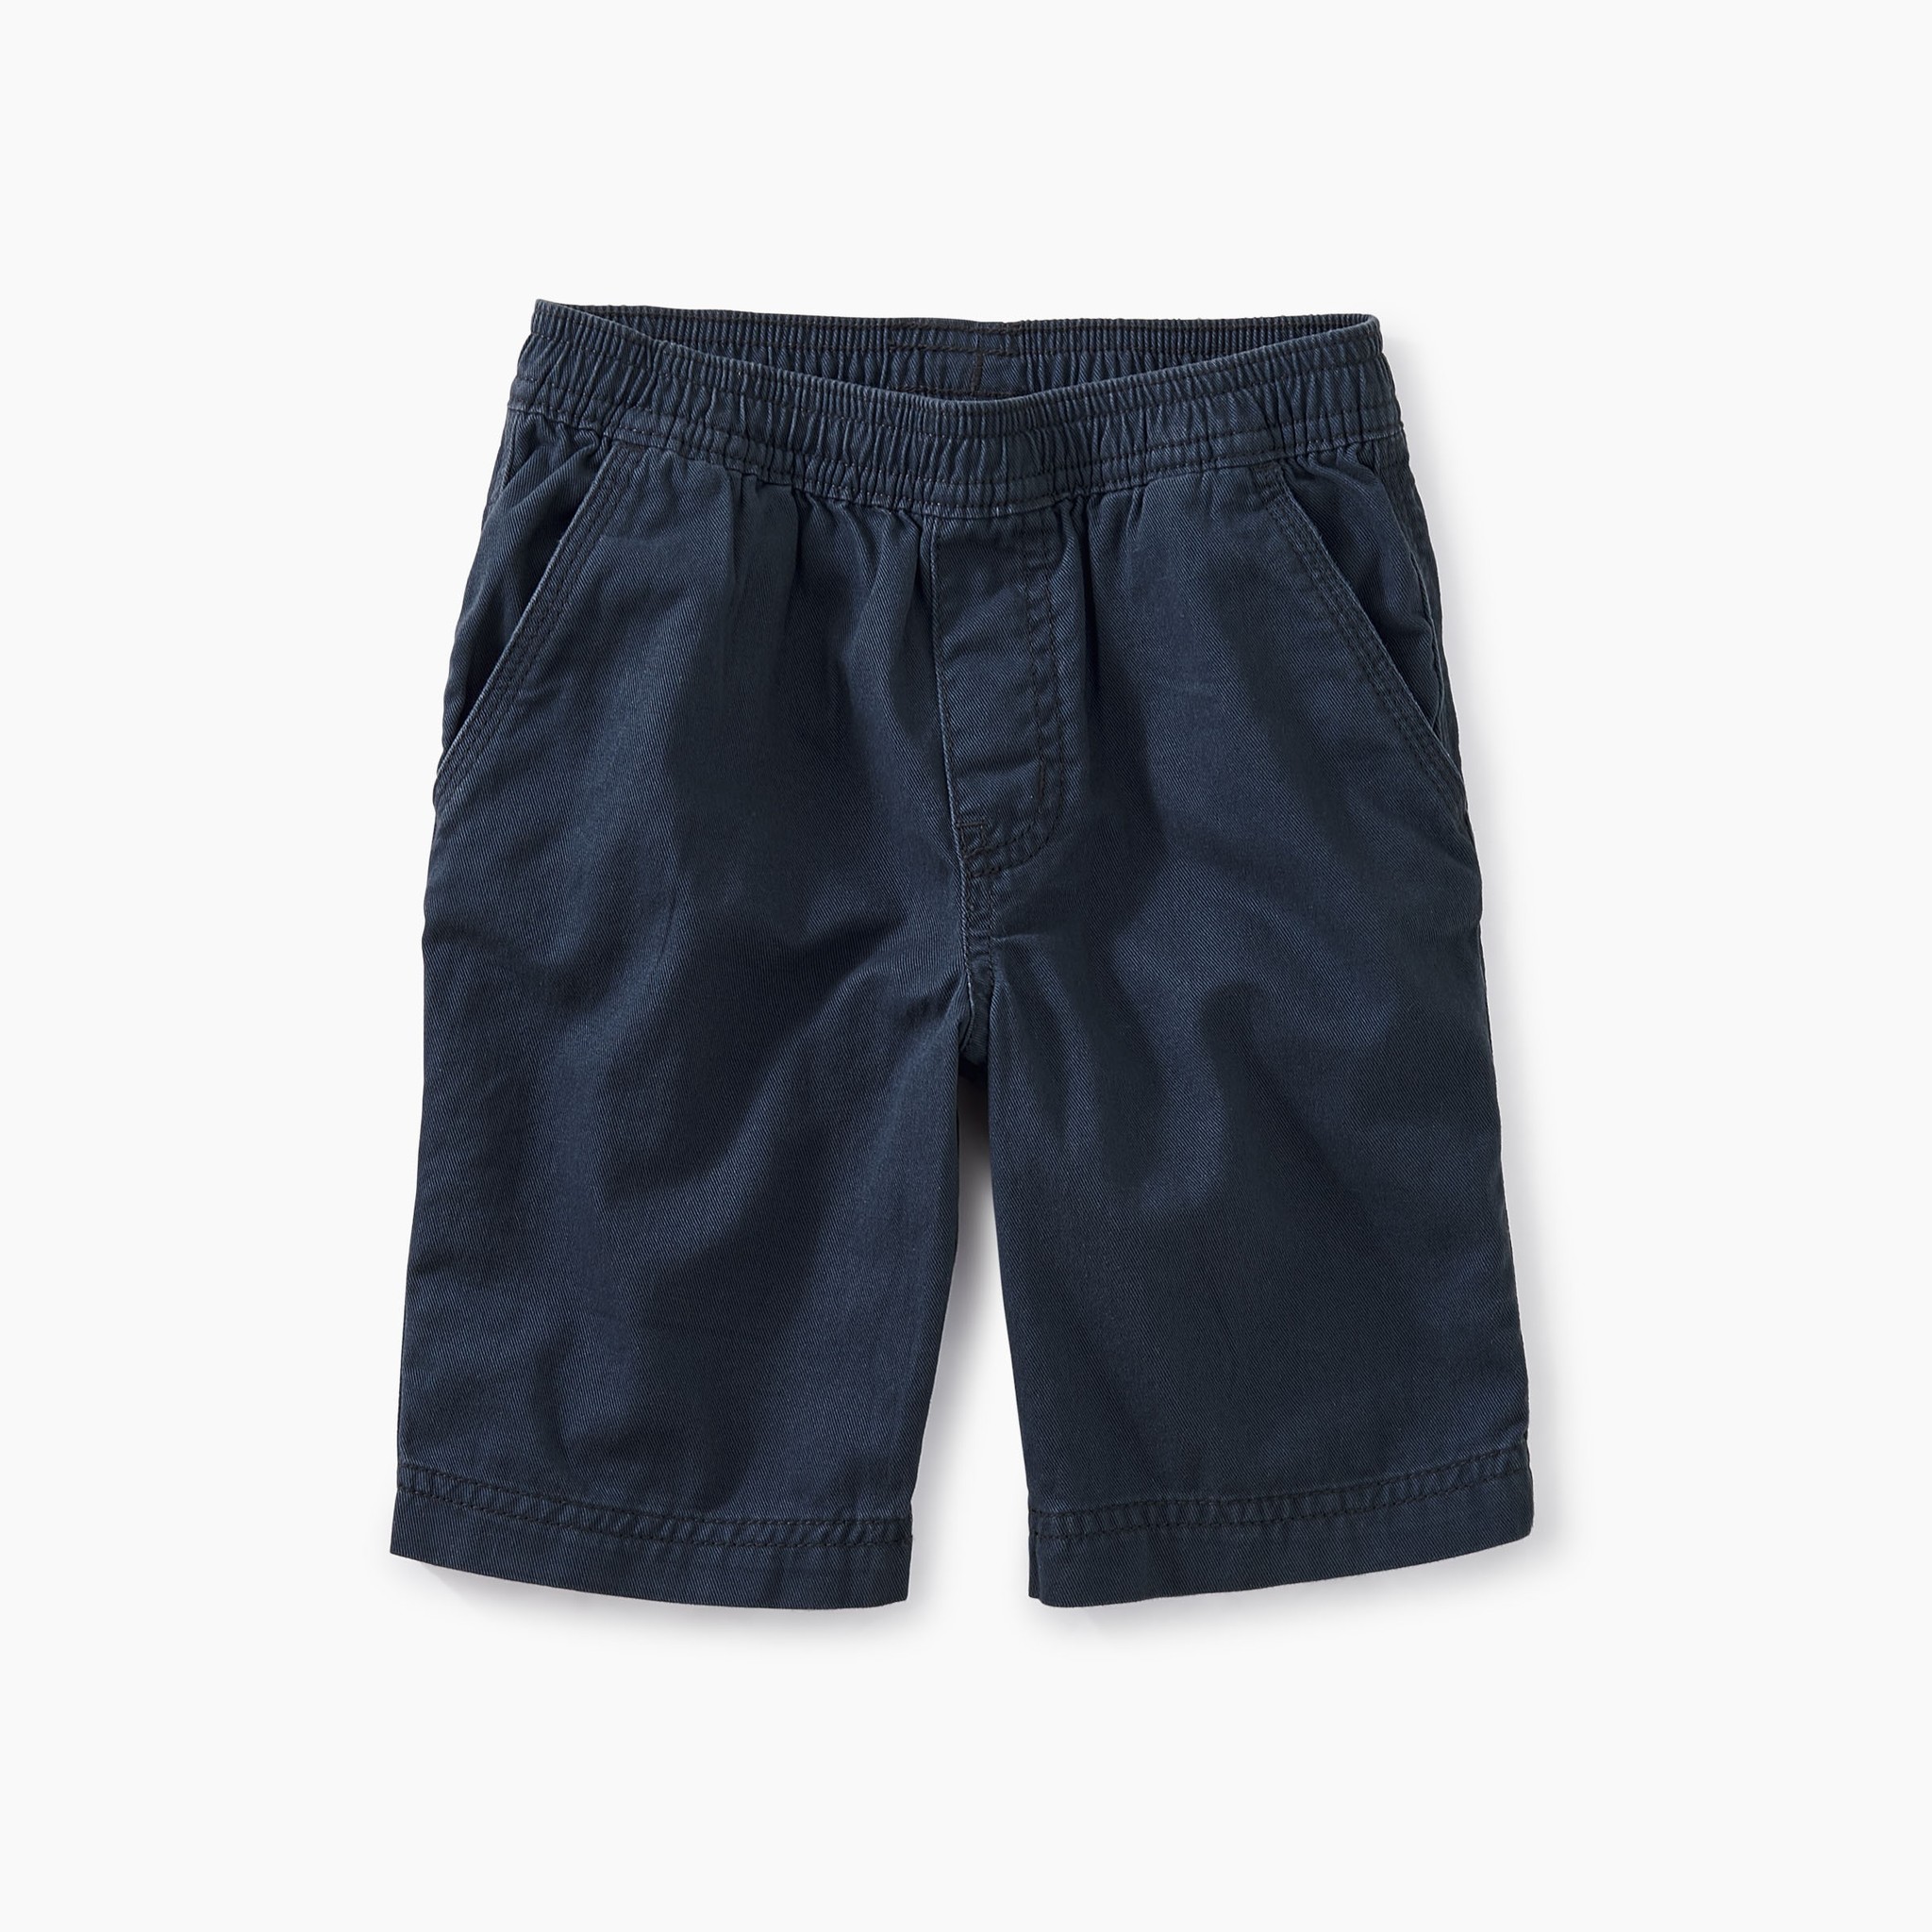 Tea Collection Easy Does It Twill Shorts - Indigo